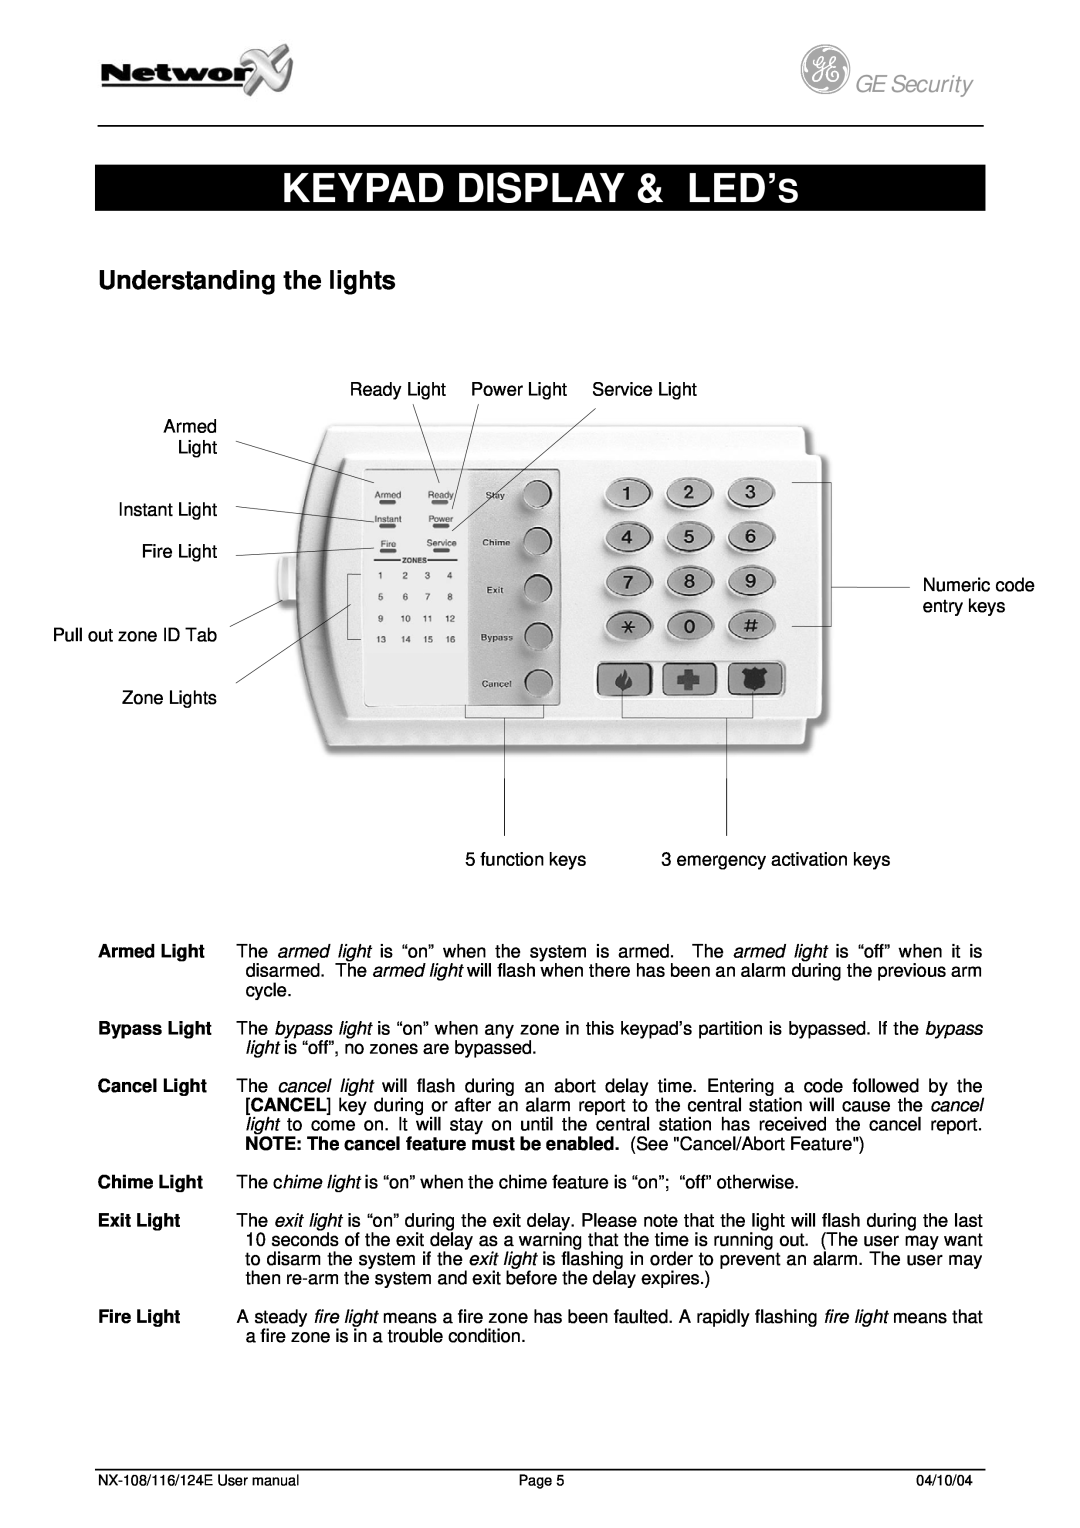 GE NX-108/116/124E user manual Keypad Display & Led’S, Understanding the lights, gGE Security 